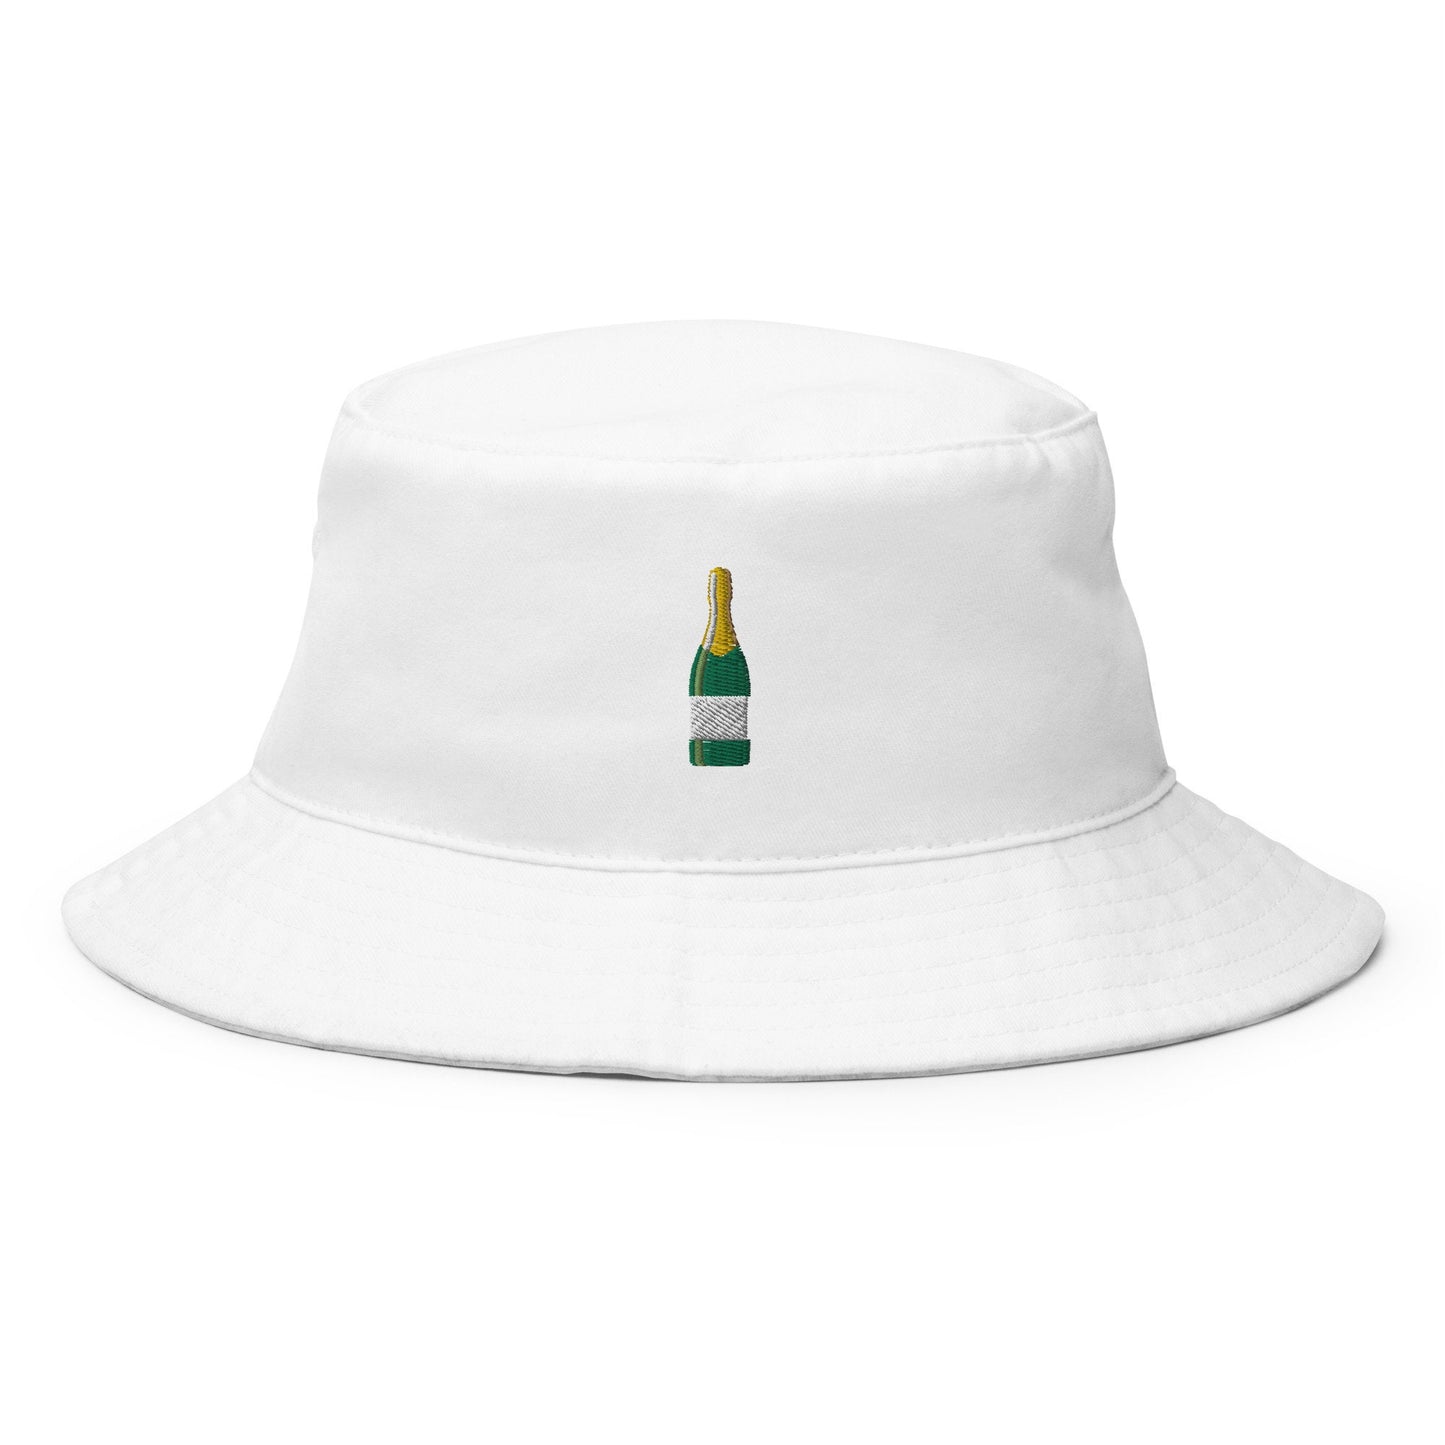 Champagne Bucket Hat - Gift for Wine & Bubbly Lovers - Cotton Embroidered - Multiple Colors - Customizable